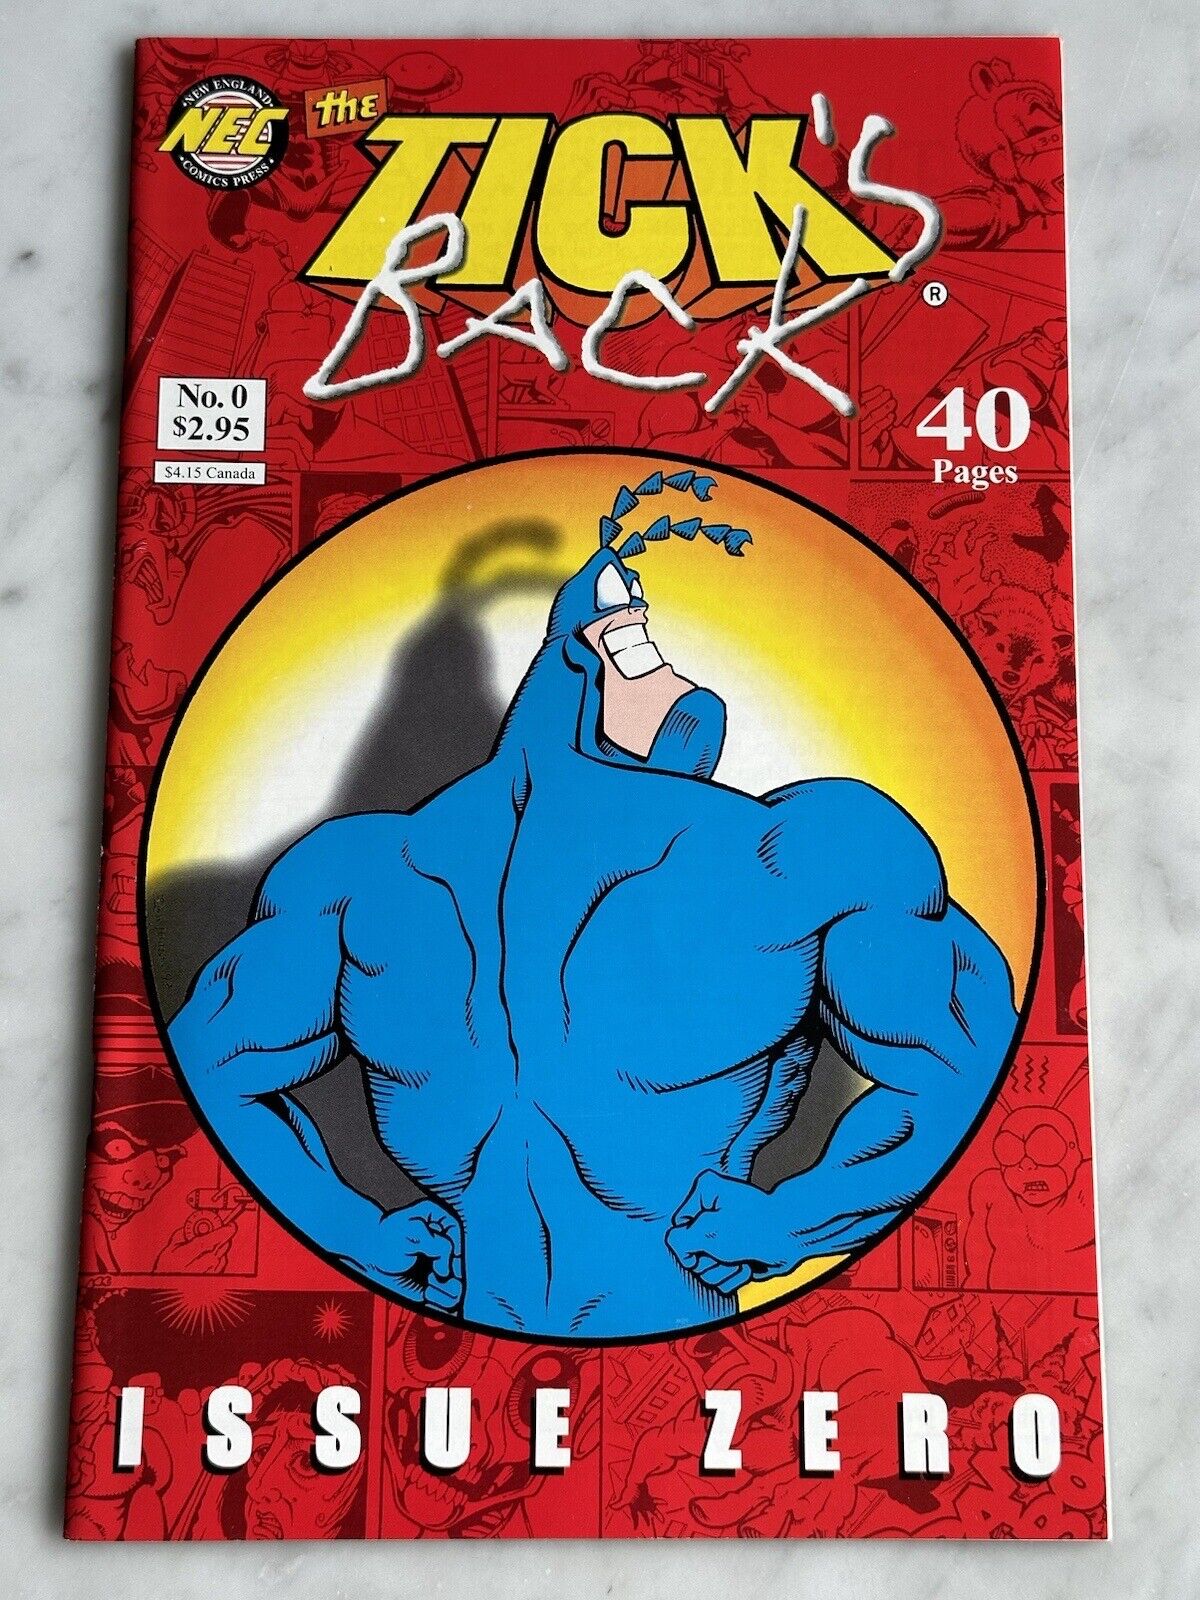 The Tick\'s Back #0 One-Shot Special in High-Grade (New England, 1997)